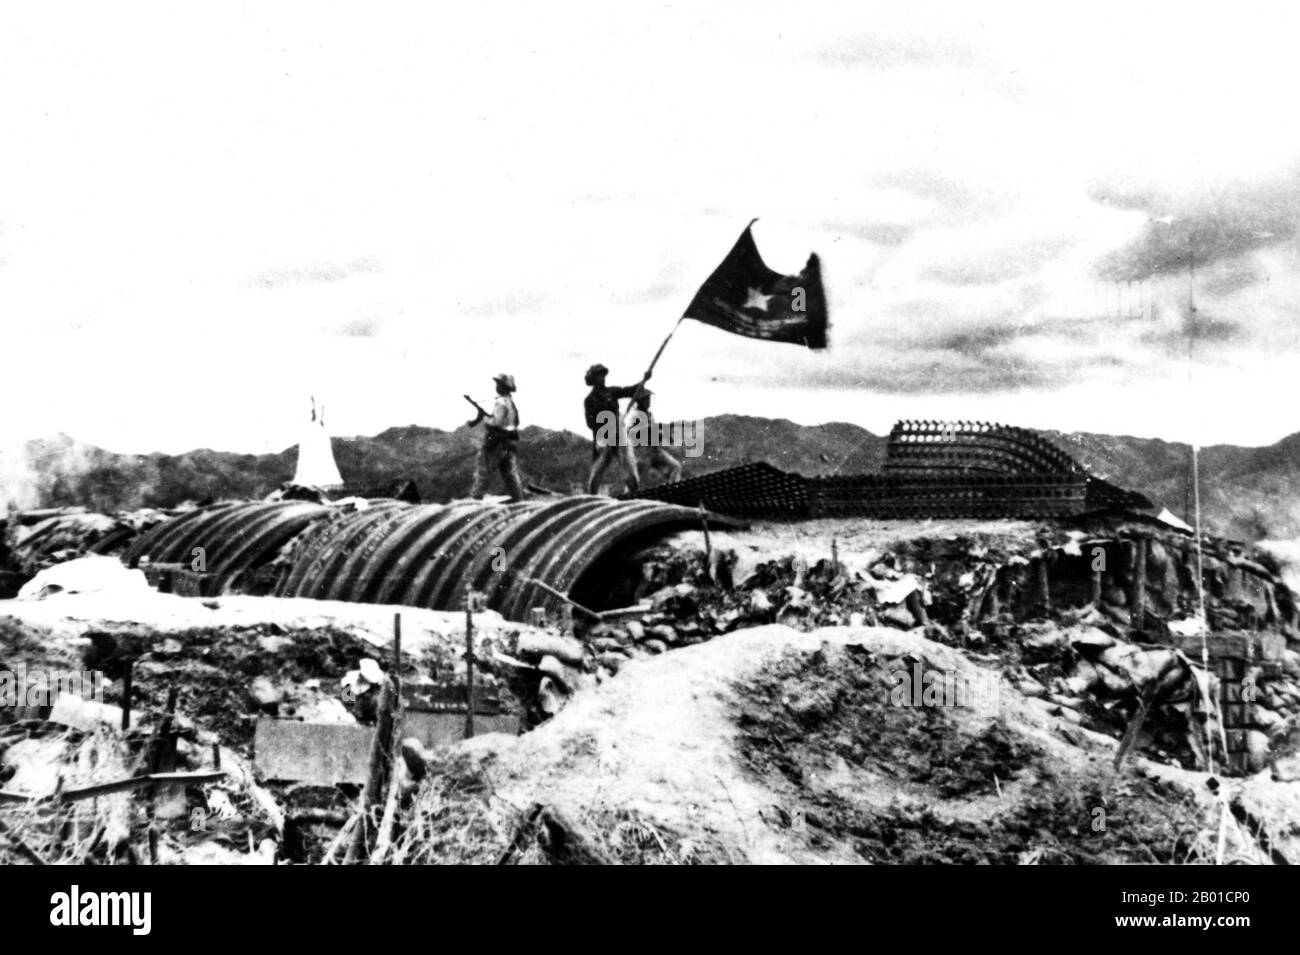 Vietnam: Victorious Viet Minh troops wave a Vietnamese flag over captured French positions at Dien Bien Phu, 1954.  The important Battle of Dien Bien Phu was fought between the Việt Minh (led by General Vo Nguyen Giap), and the French Union (led by General Henri Navarre, successor to General Raoul Salan). The siege of the French garrison lasted fifty-seven days, from 5:30PM on March 13 to 5:30PM on May 7, 1954.  The southern outpost or fire base of the camp, Isabelle, did not follow the cease-fire order and fought until the next day at 01:00 AM. Stock Photo